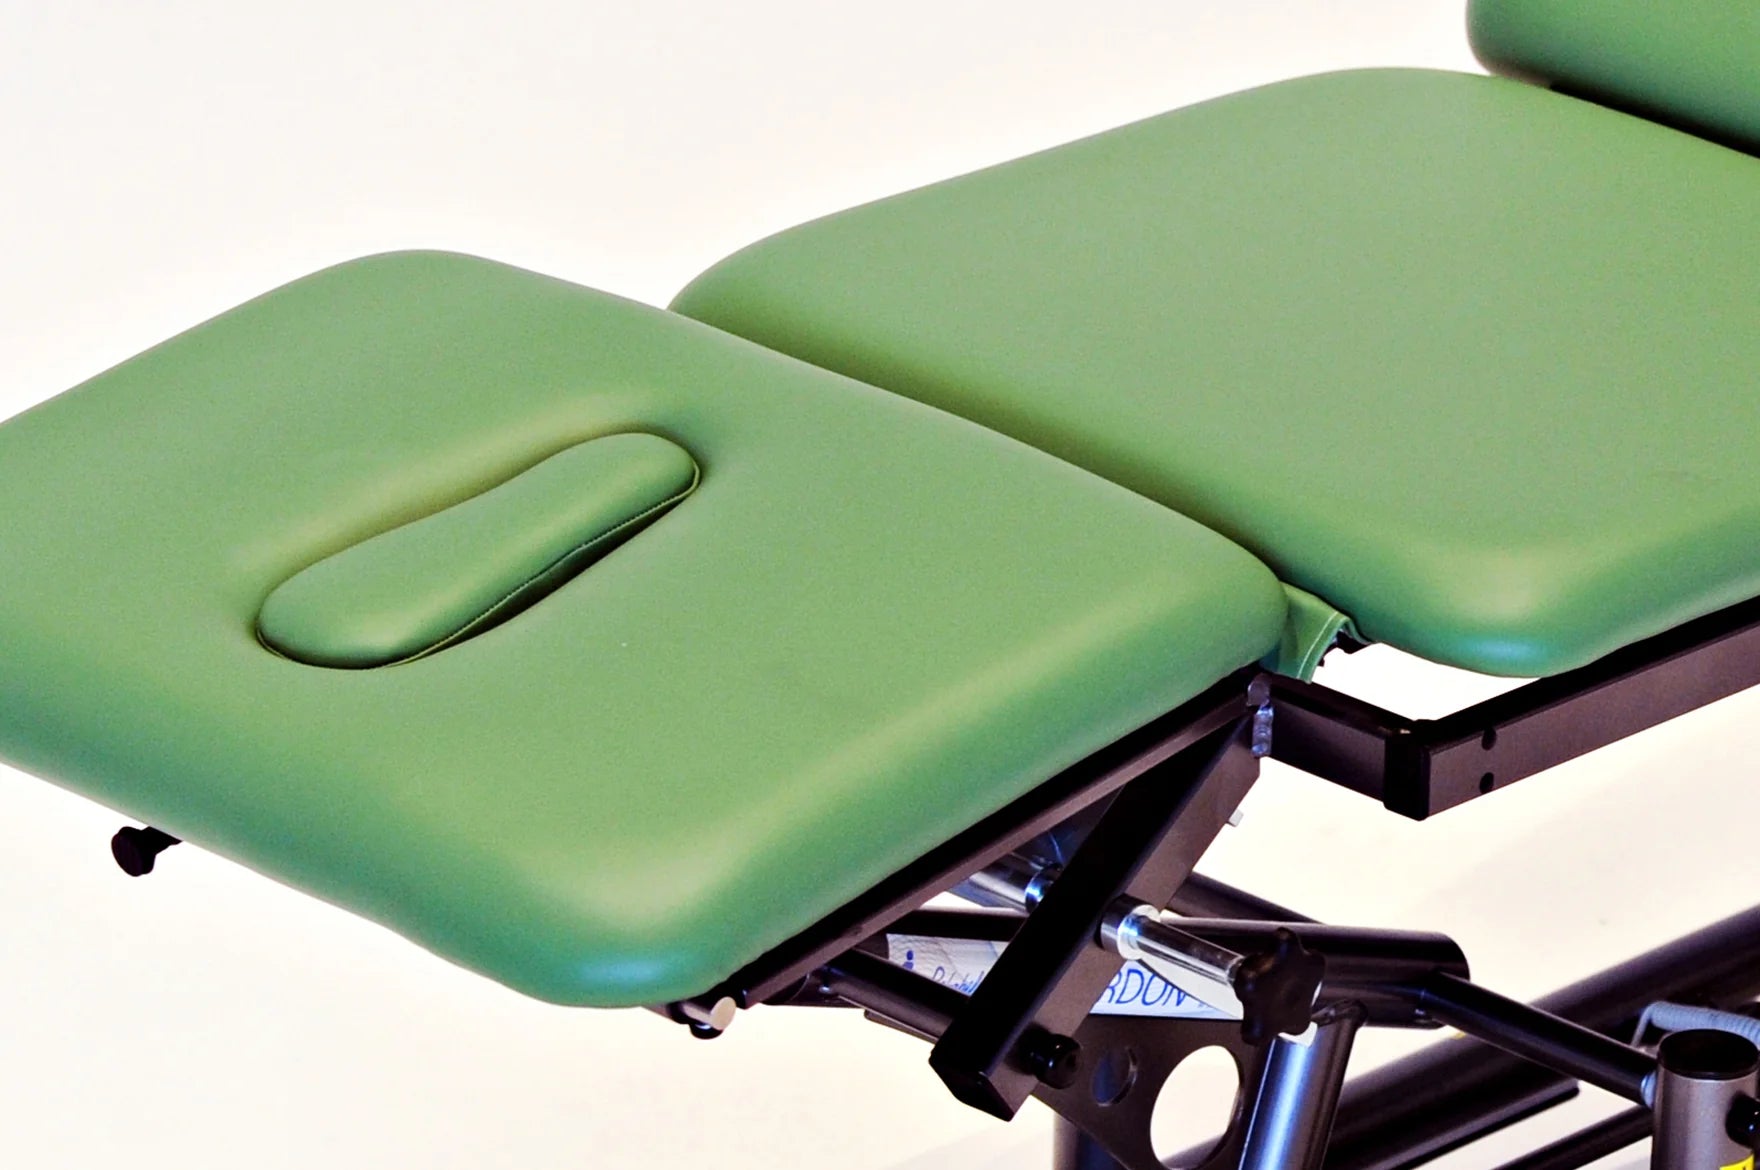 Cardon Manual Physical Therapy Table (MPT)